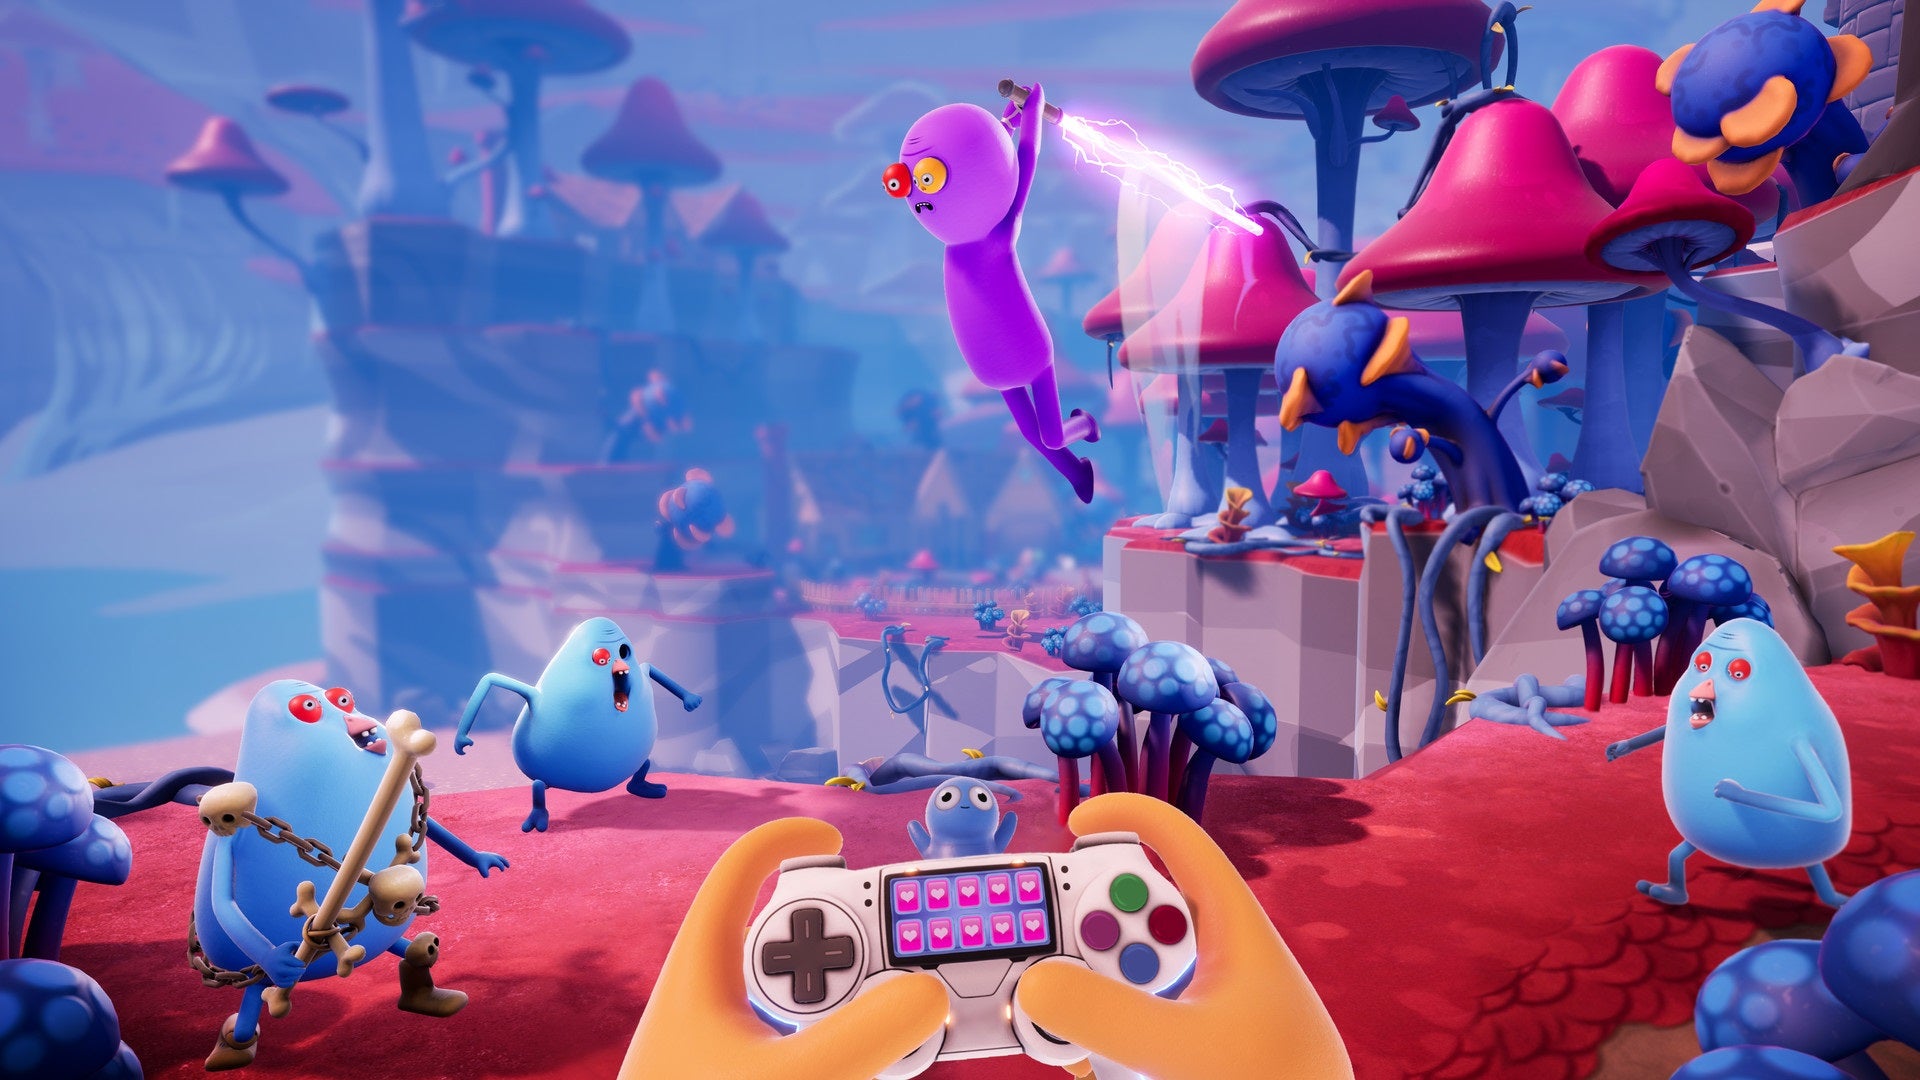 2019's Trover Saves the Universe was Squanch Games' third release and featured Justin Roiland's voice acting.  (Image: Squanch Games)